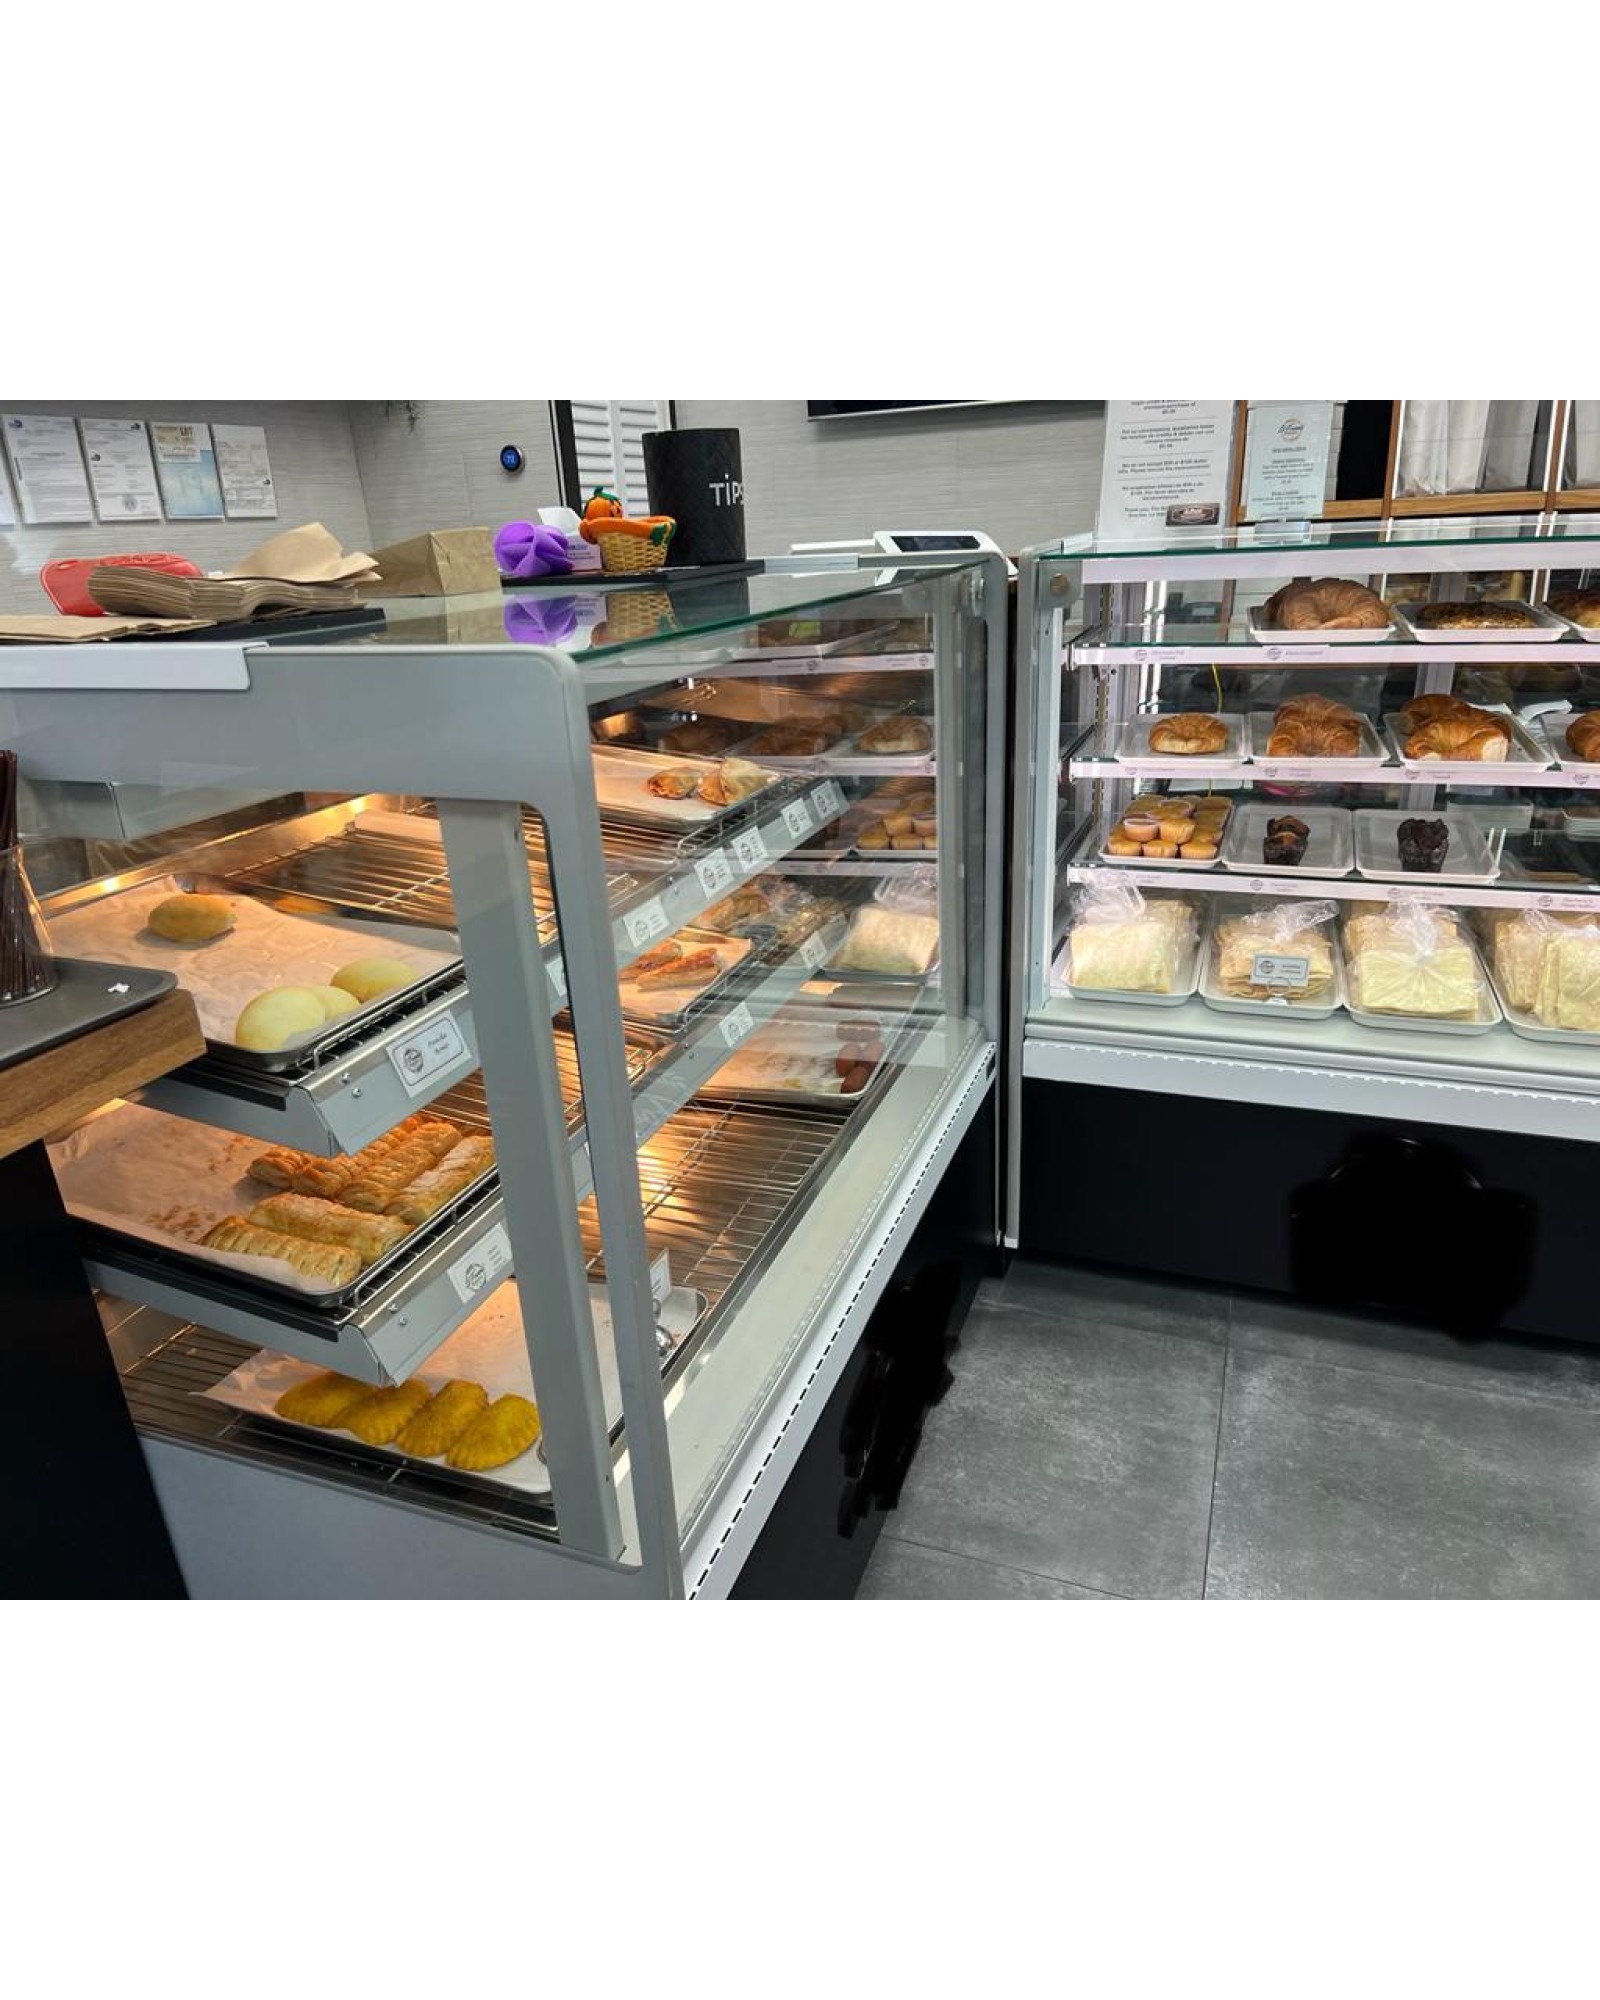 Bakery Case (Non-Refrigerated 39")